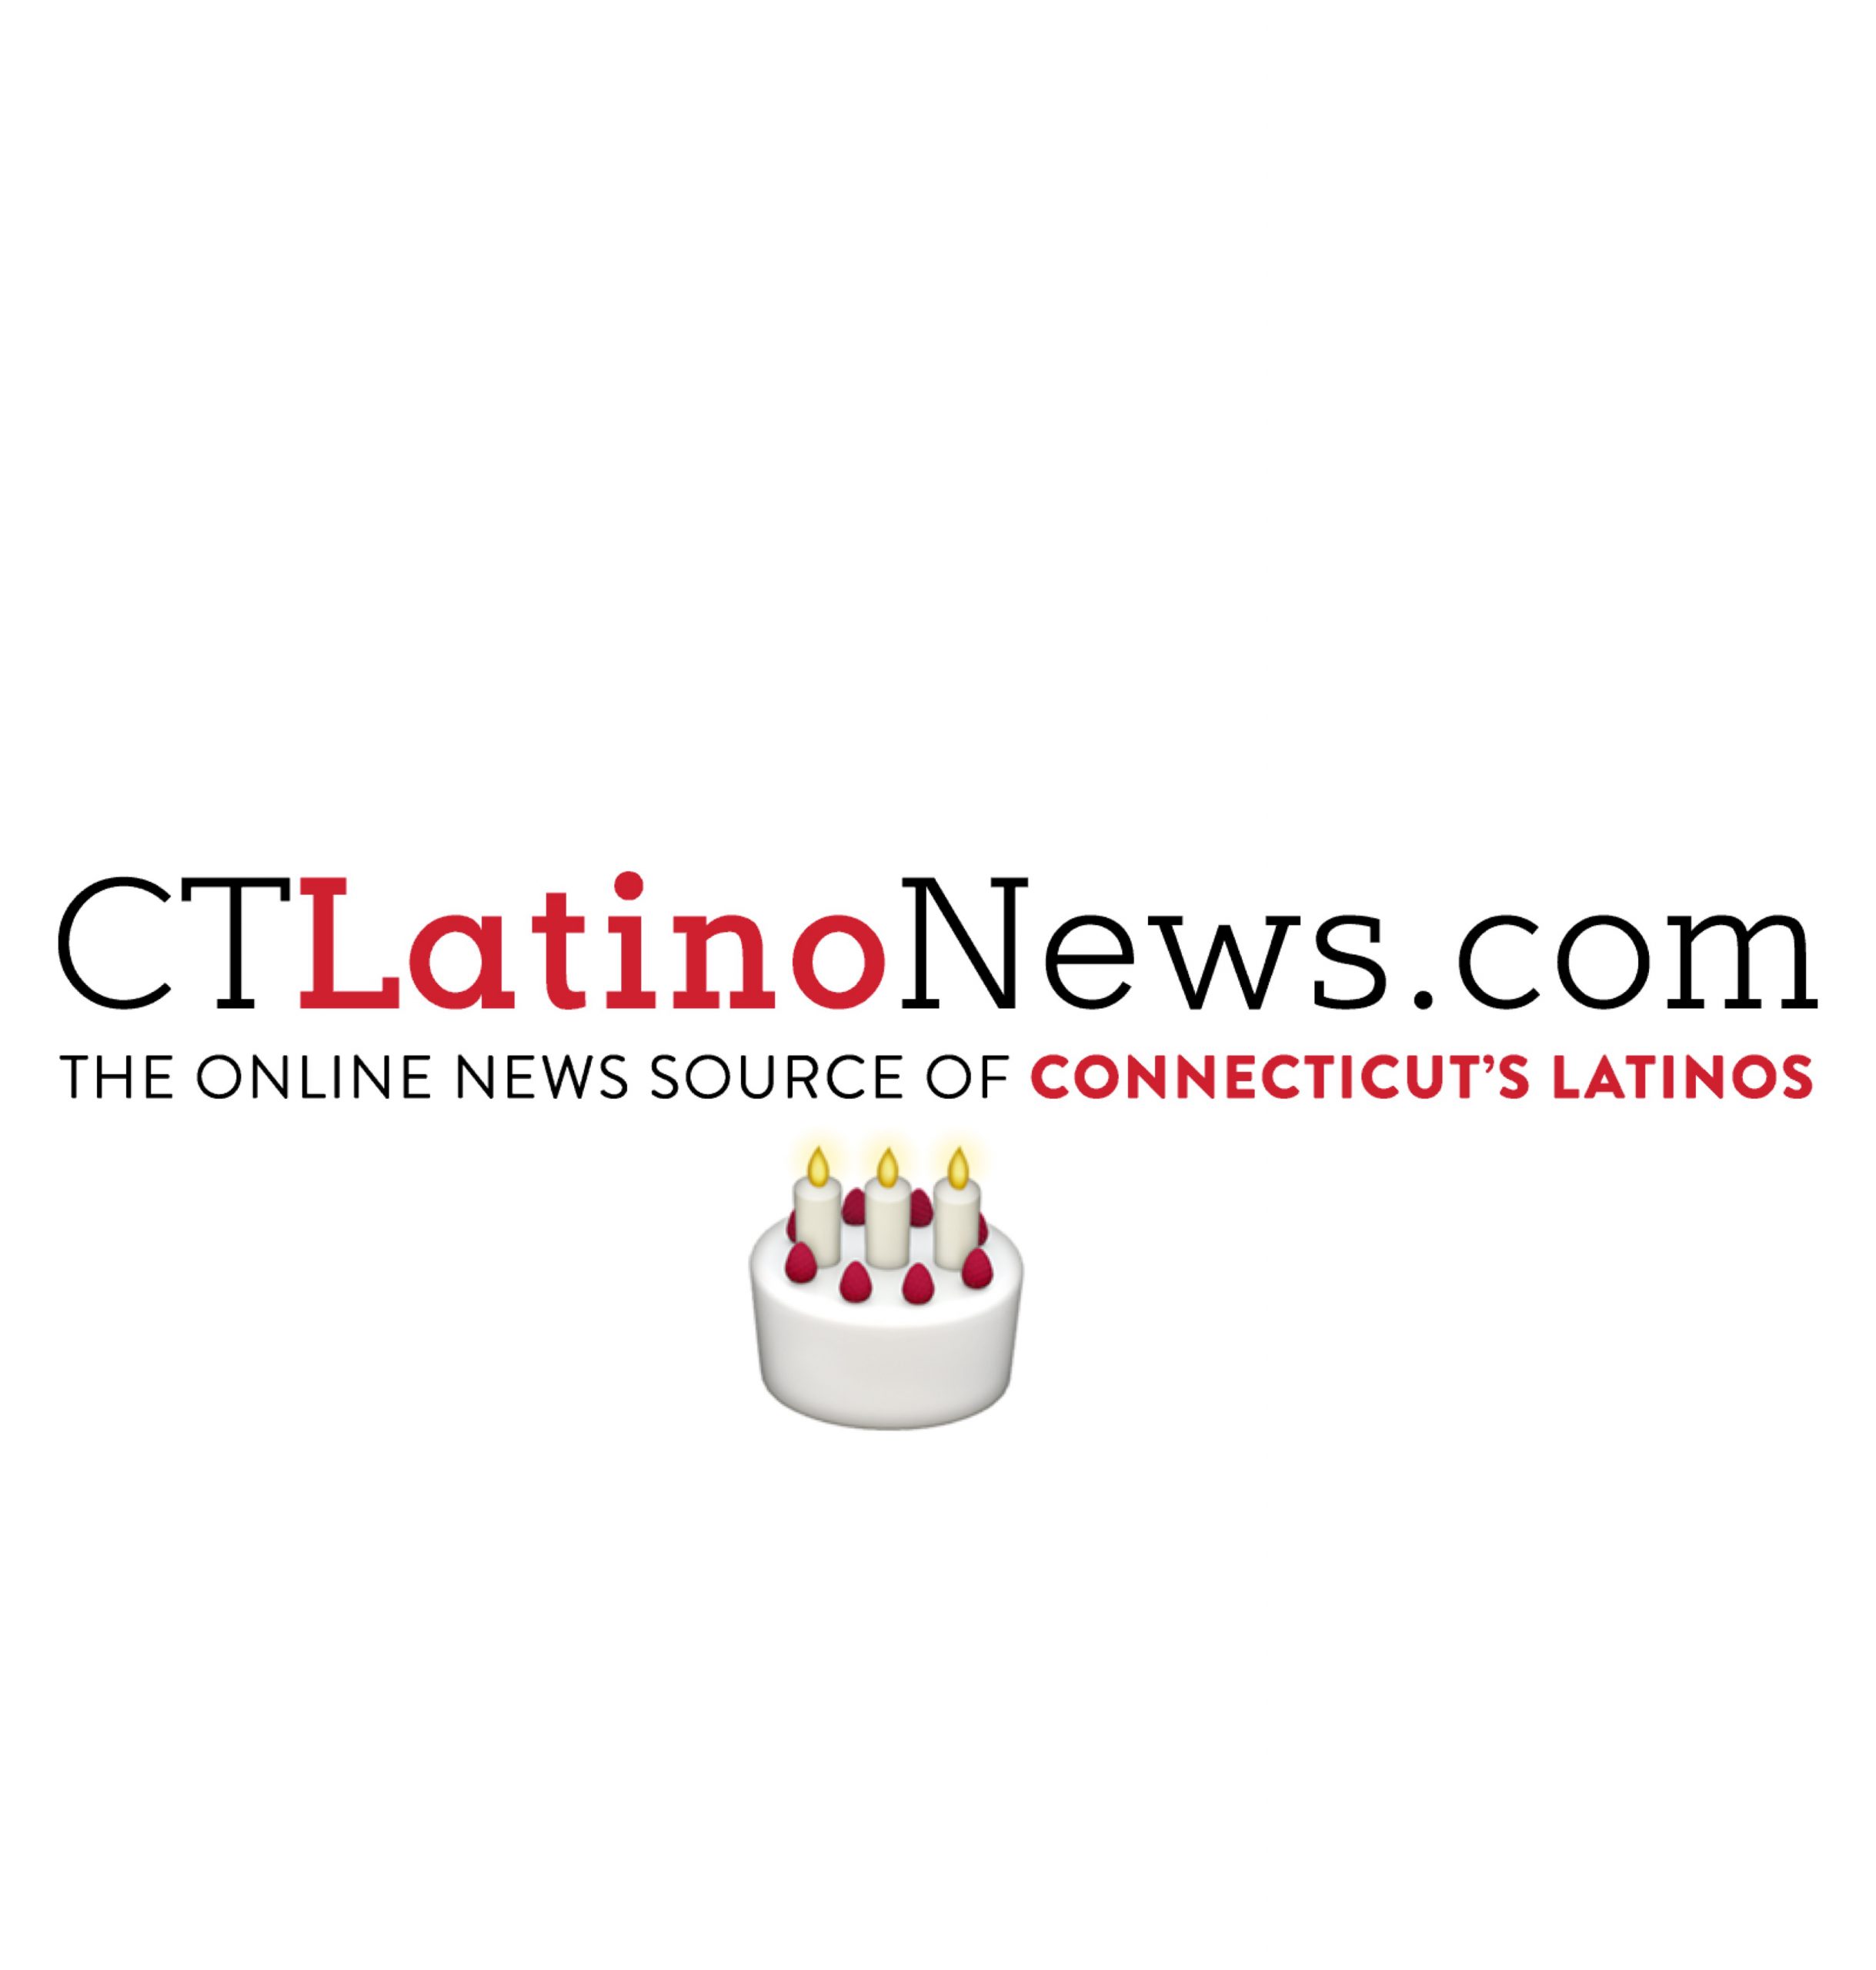 CTLN Celebrates 10 Years Serving Connecticut Latinos